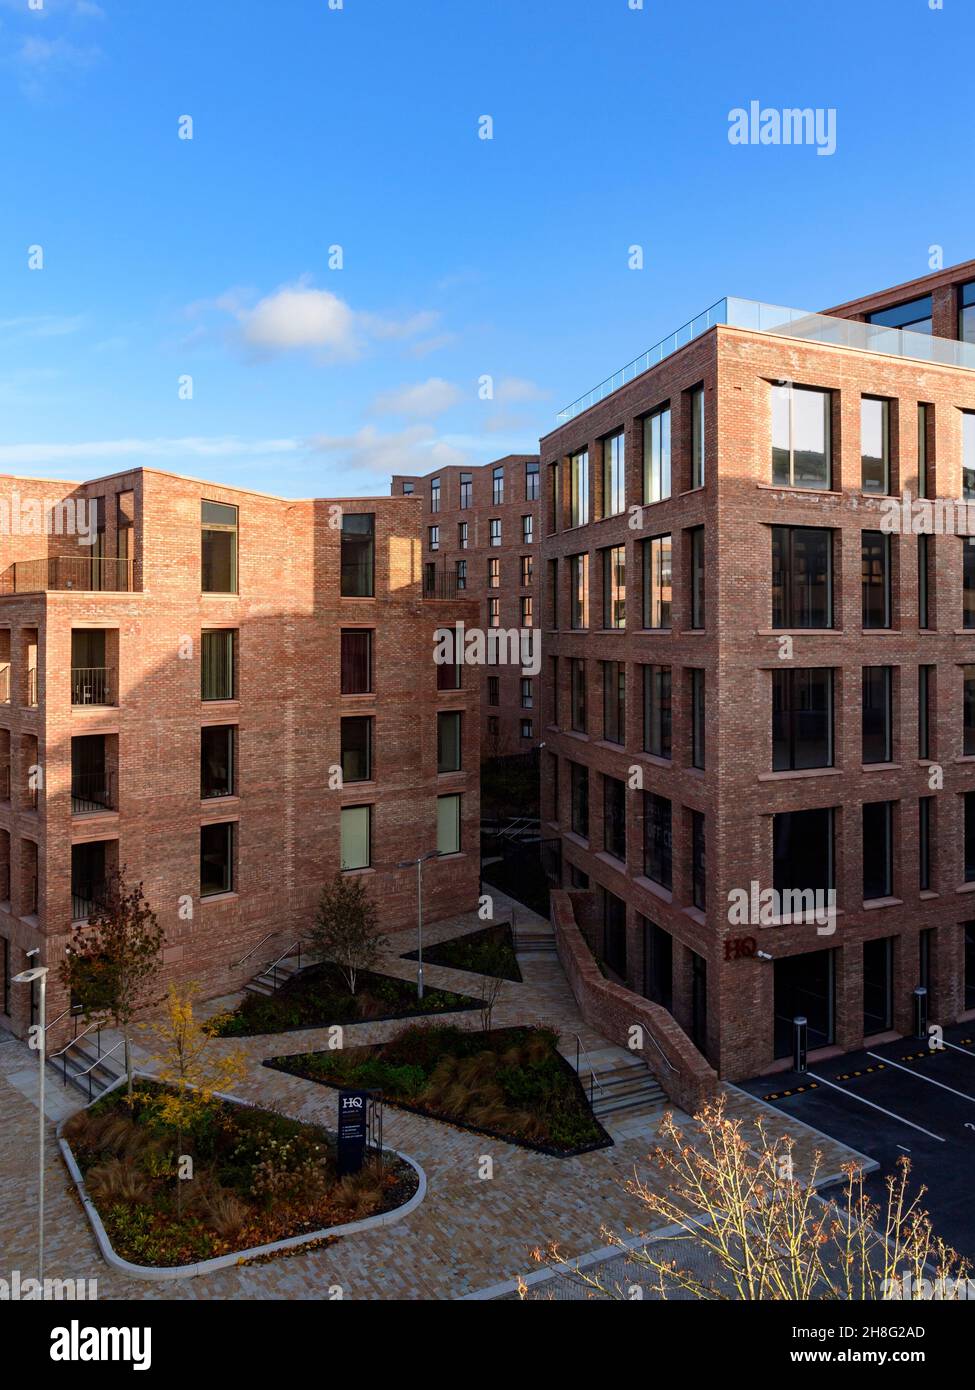 Regenerated & newly developed York prime location (mixed-use, brick-built, new high-rise apartments, office building) - North Yorkshire, England UK. Stock Photo